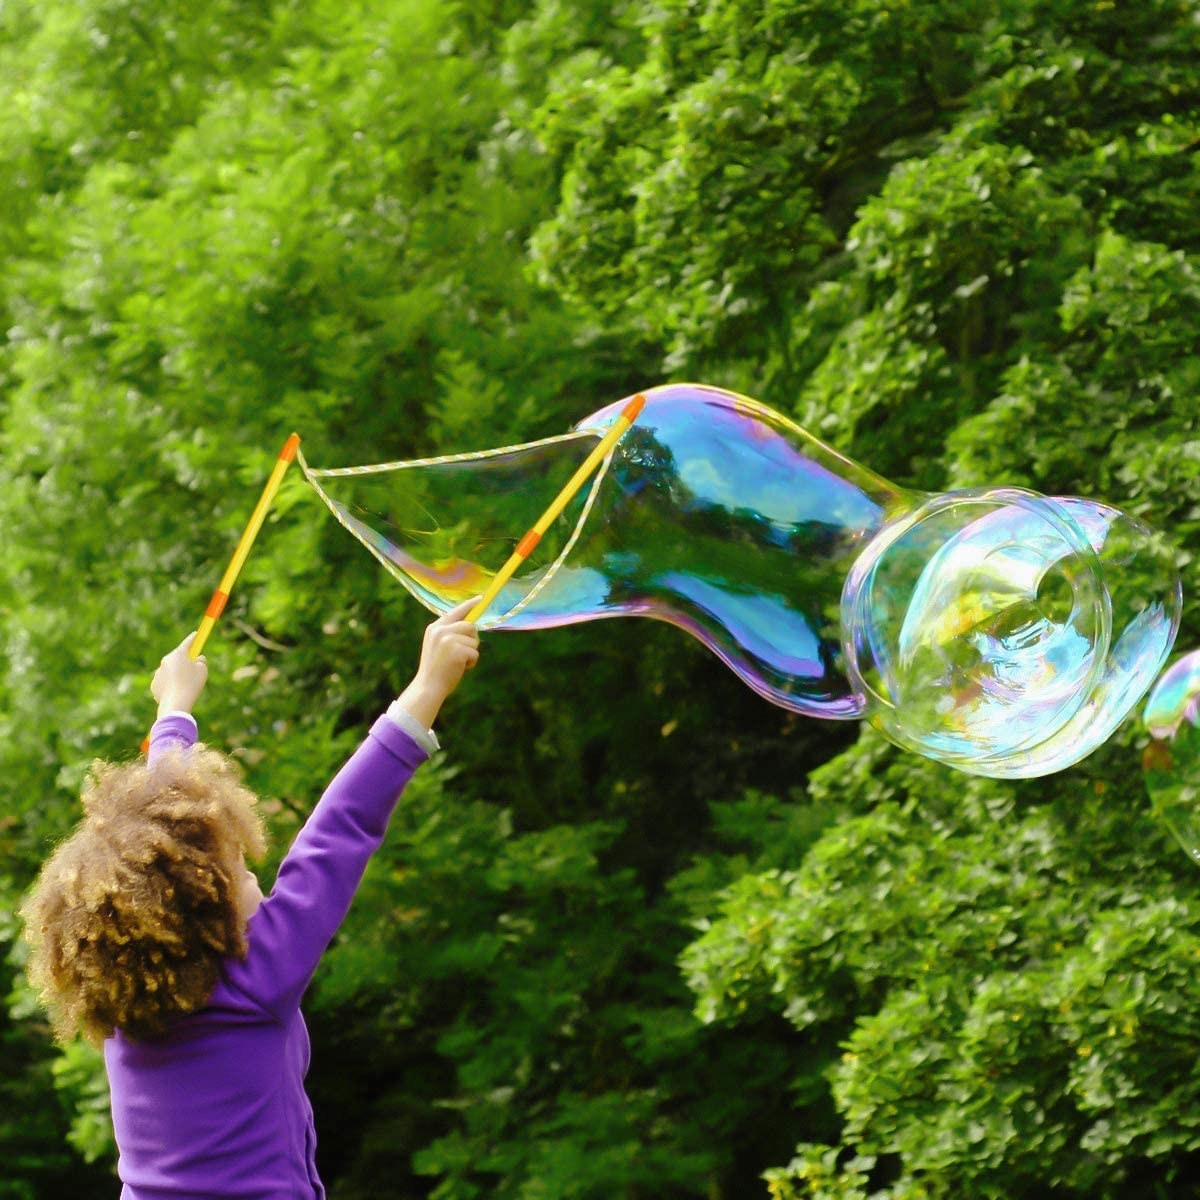 the giant bubble wand kit